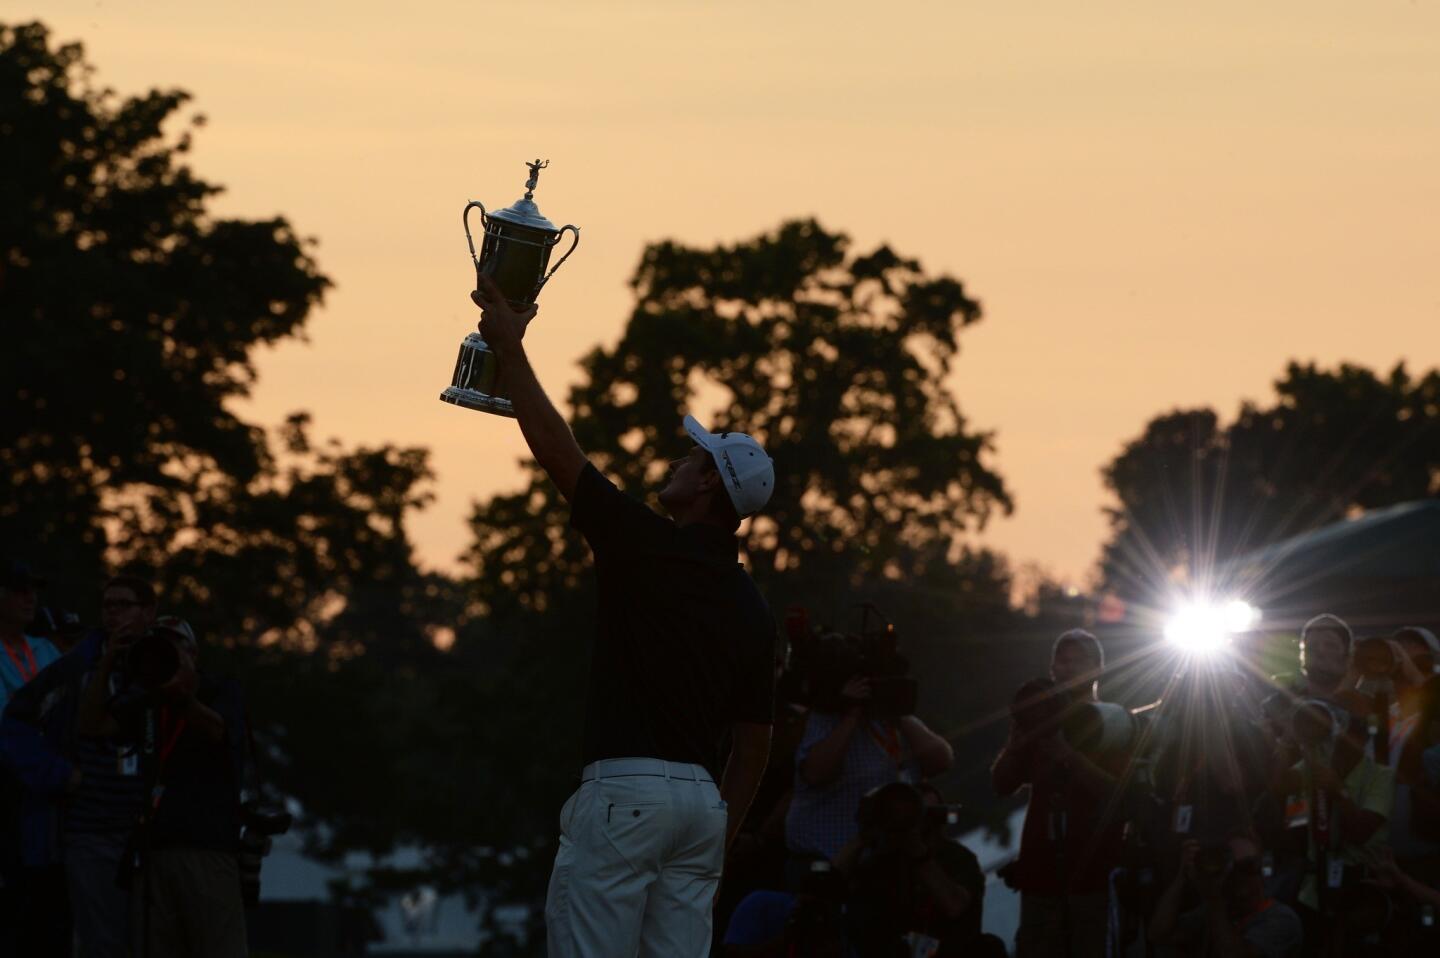 Justin Rose holds the winner's trophy aloft during the U.S. Open awards ceremony at Merion Golf Club on Sunday in Ardmore, Pa. It was the Englishman's first major victory.